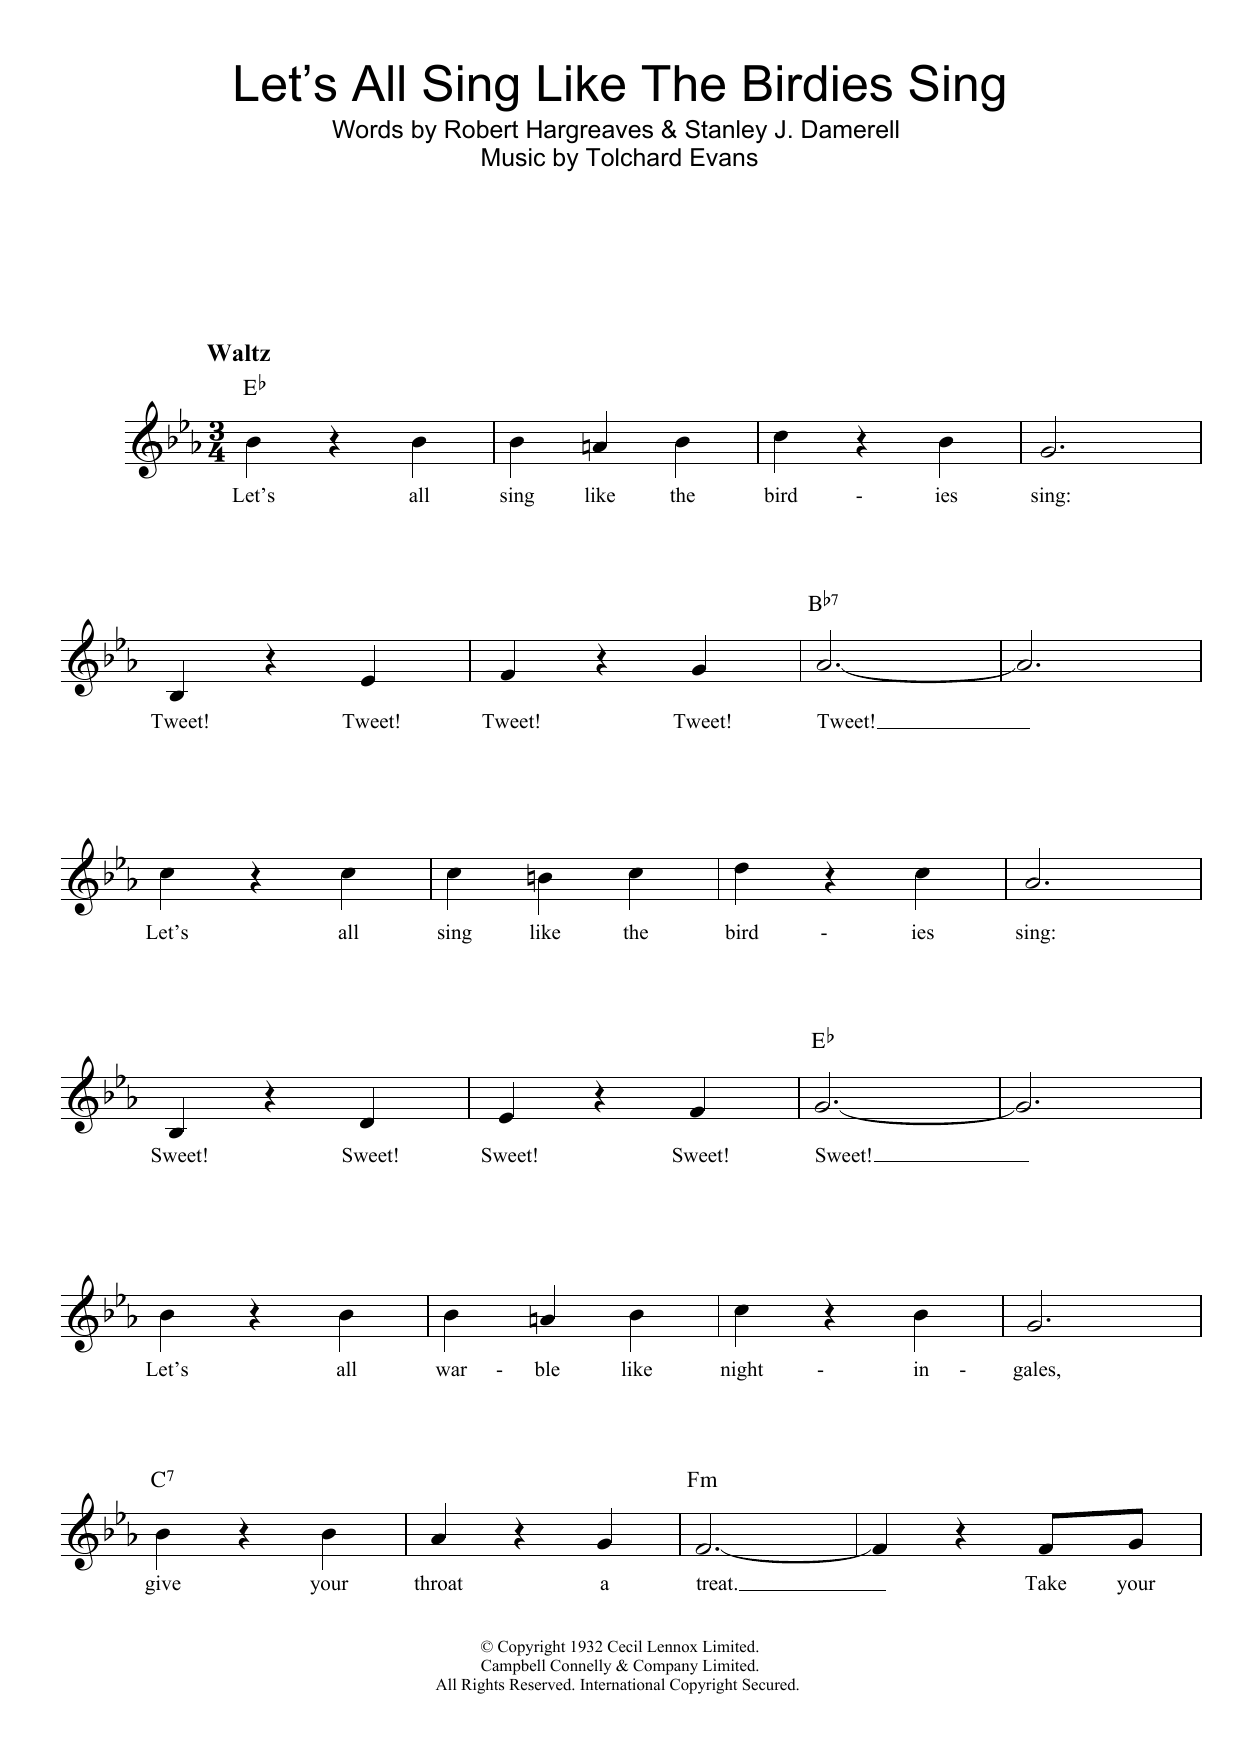 Download Tolchard Evans Let's All Sing Like The Birdies Sing Sheet Music